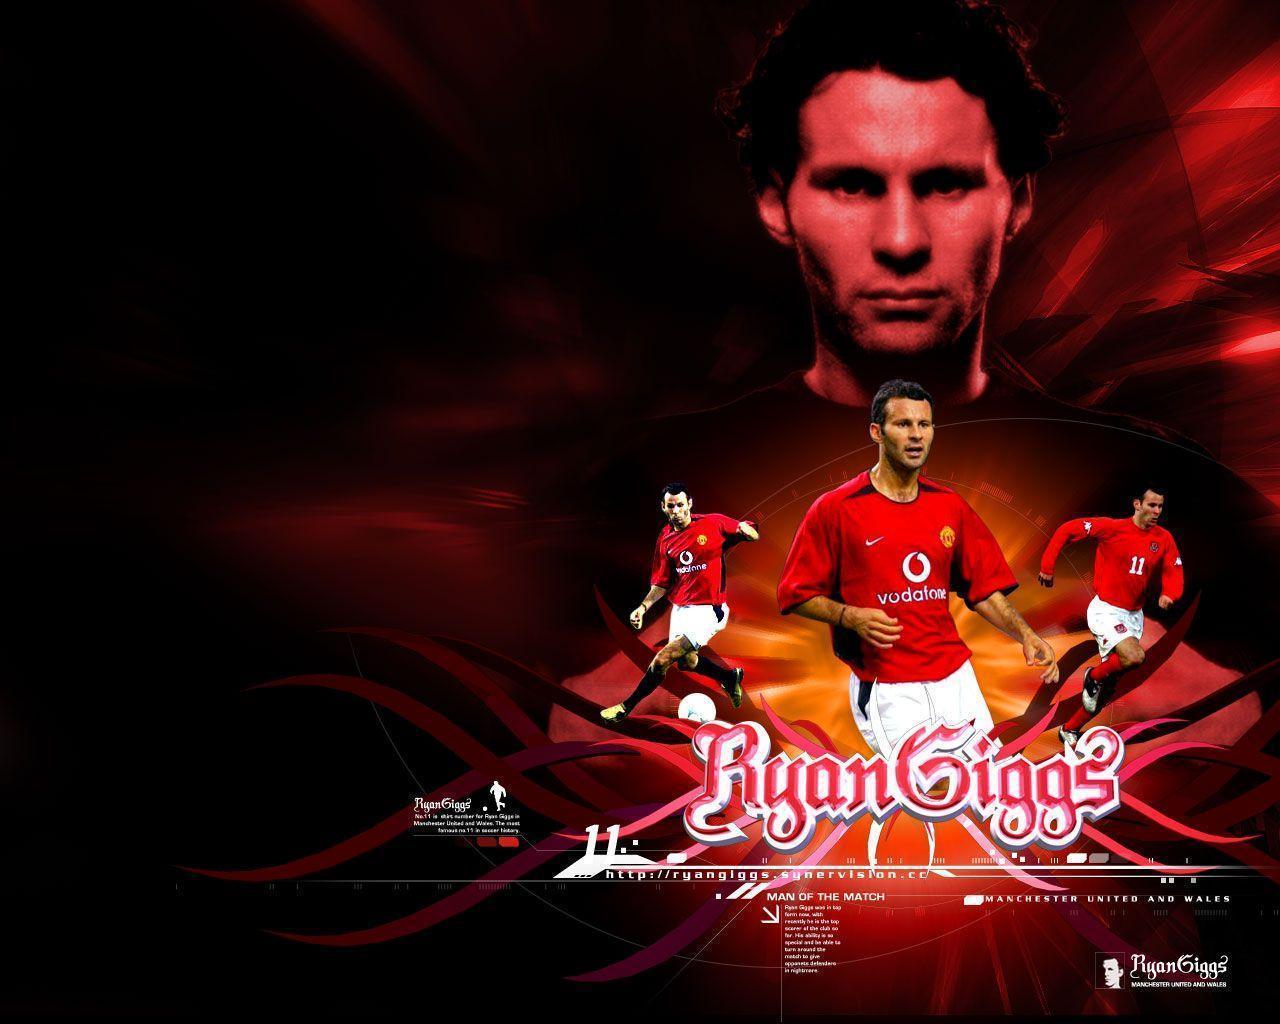 Genius, Home Shirt. Ryan Giggs. Legend of Manchester United & Wales